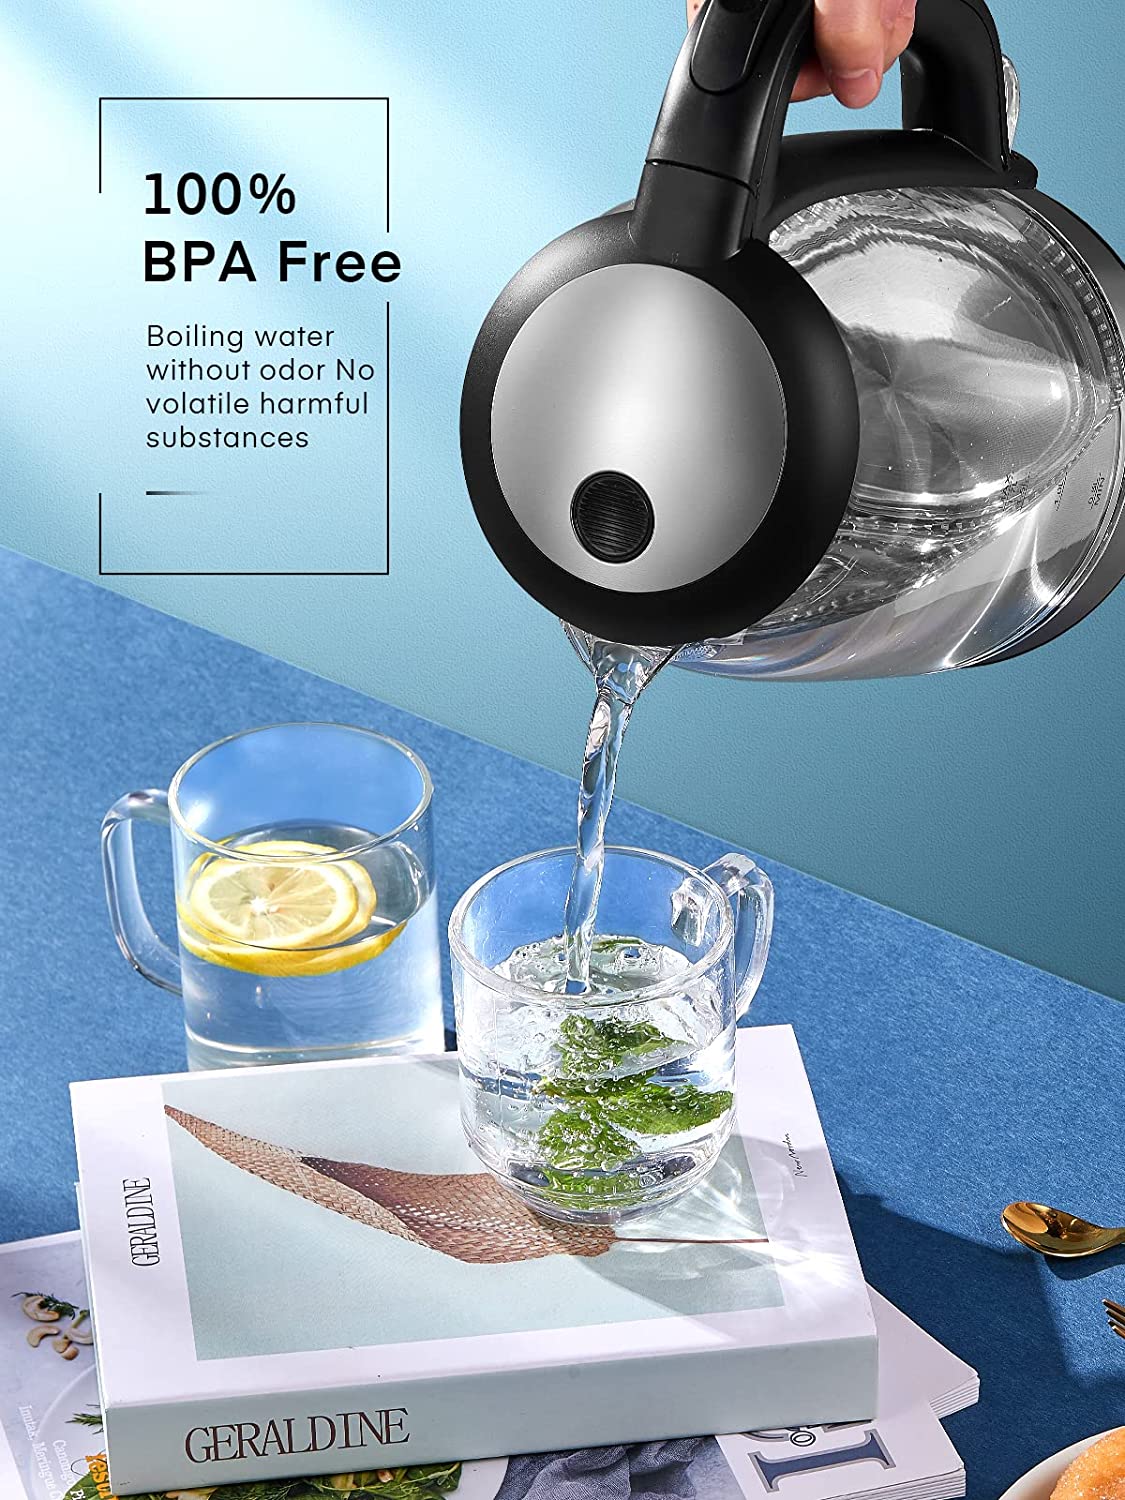 FOHERE Water Electric Kettle, 1.7L 1200W, Coffee & Tea Kettle Borosilicate Glass, Wide Opening, Auto Shut-Off, Cool Touch Handle, Base Detachable, LED Light. 360° Rotation, Boil Dry Protection